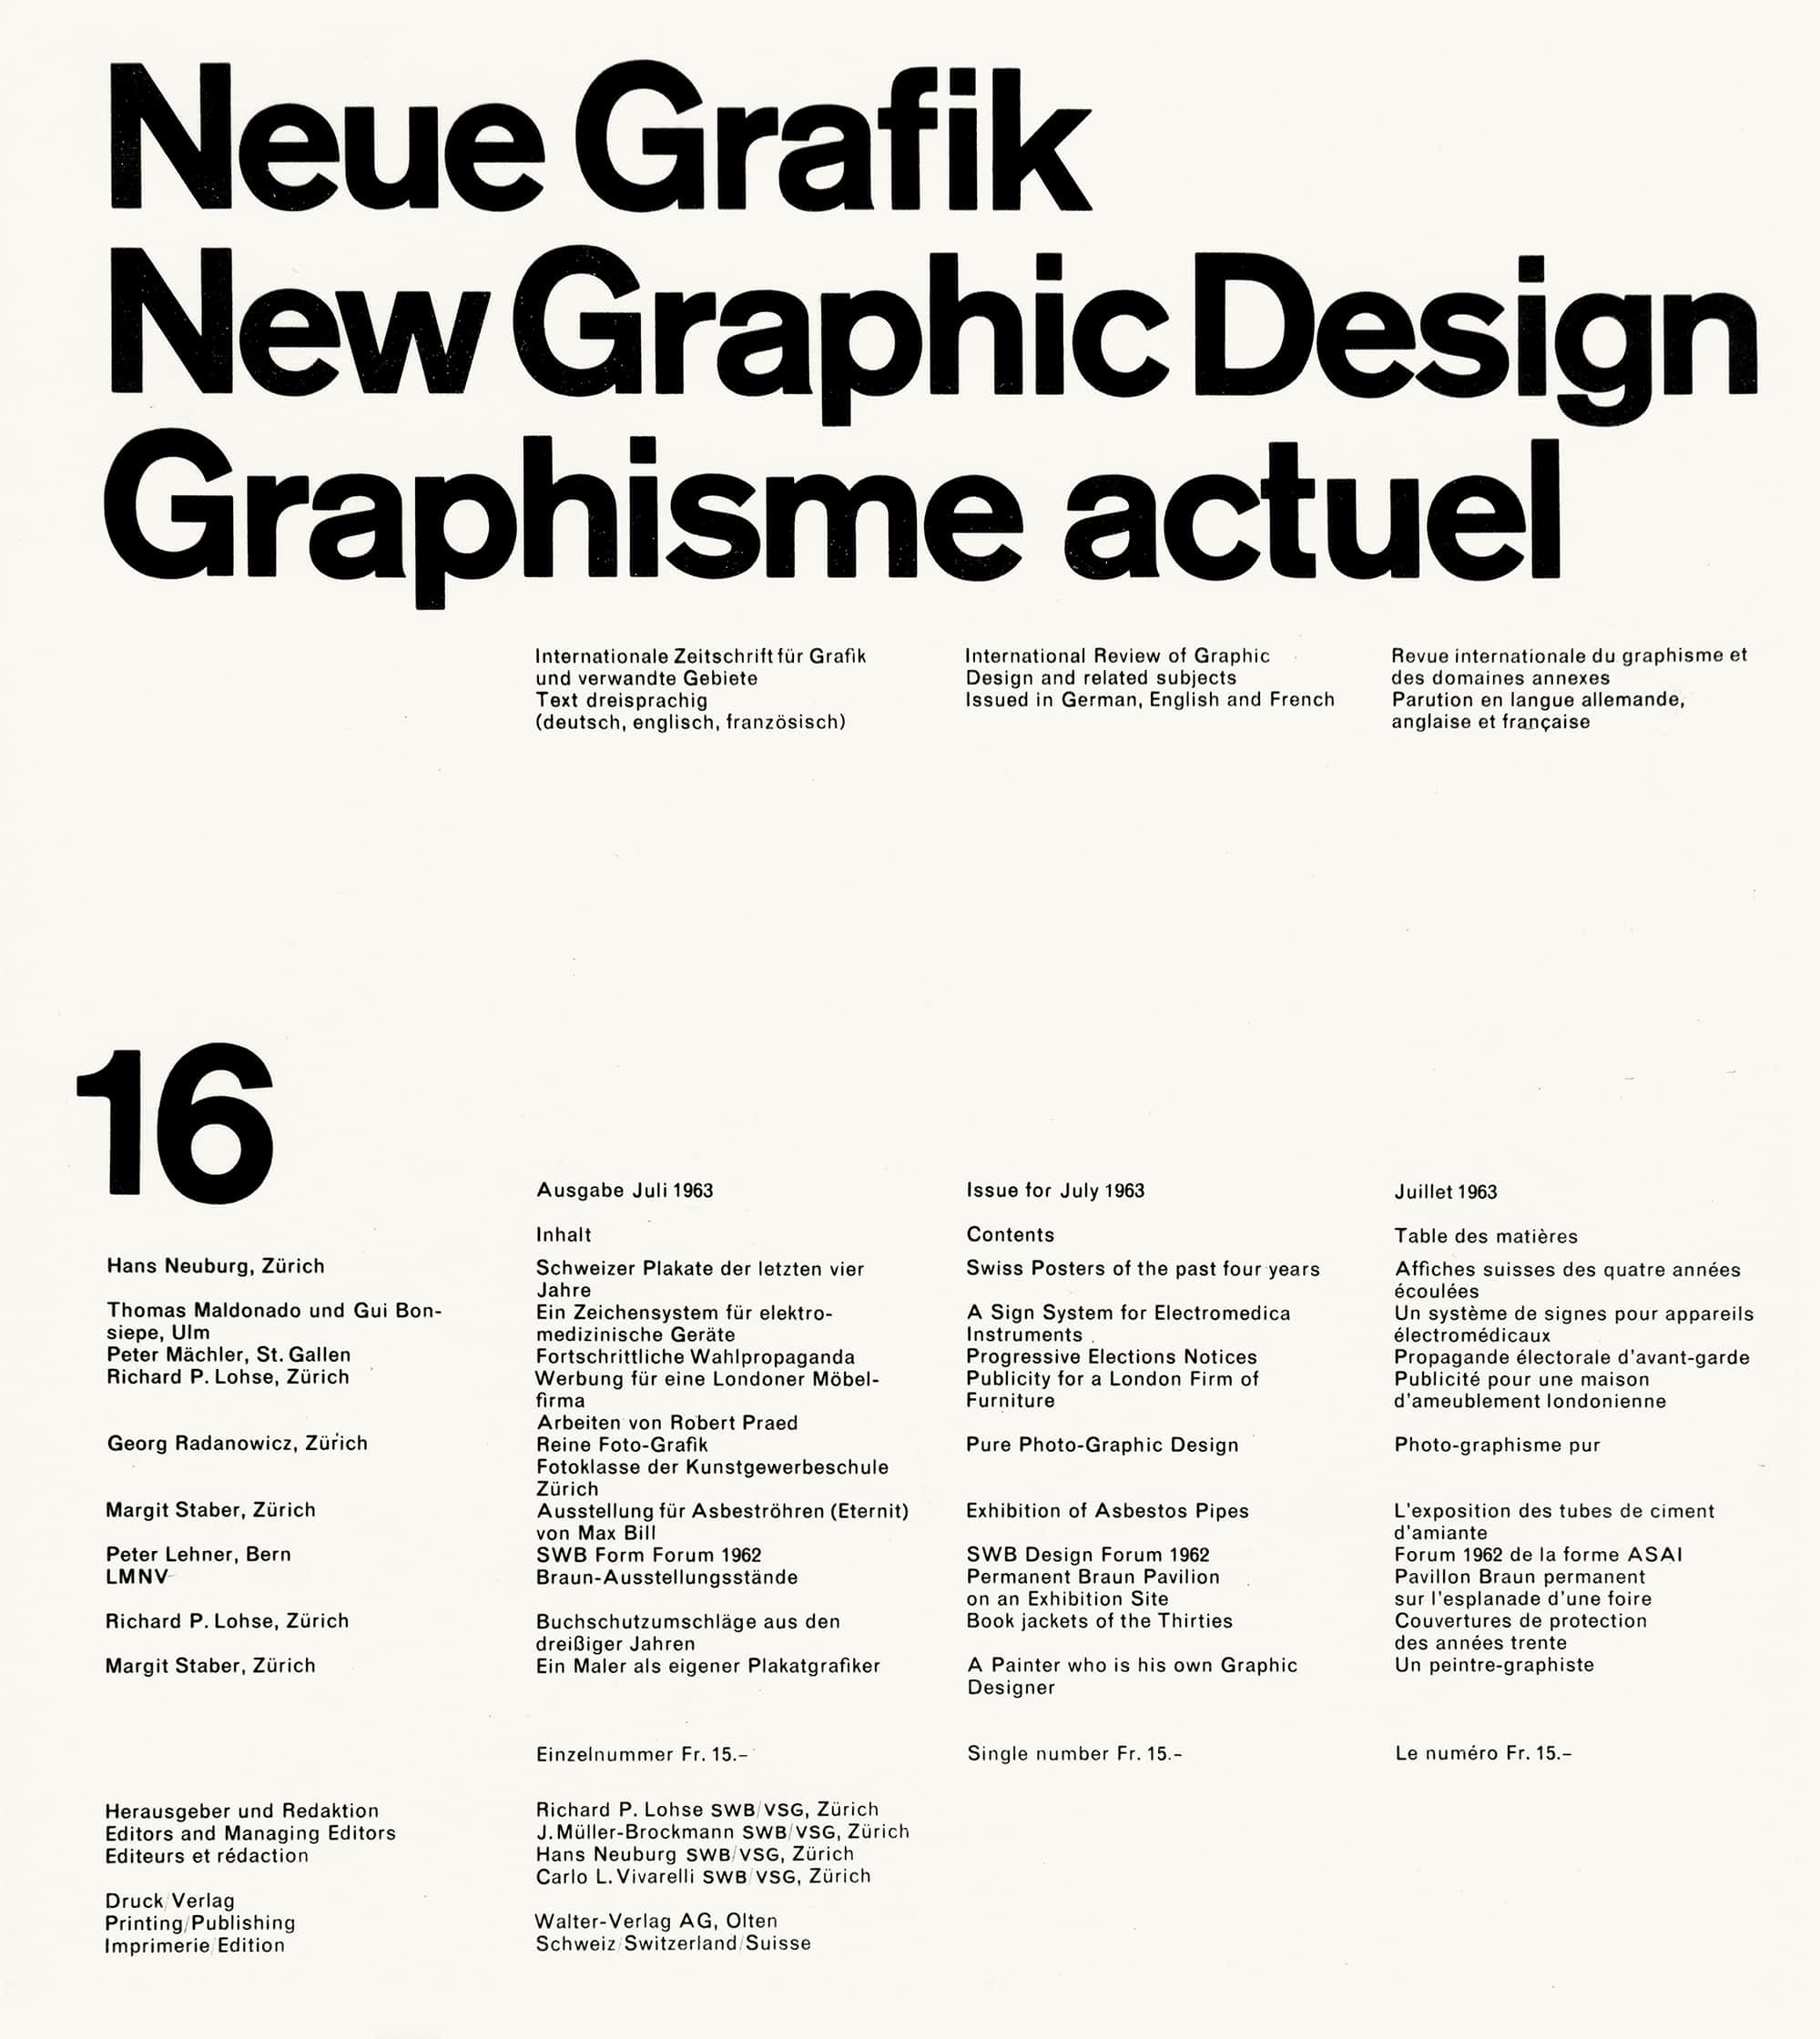 Cover of 'New Graphic Design' journal